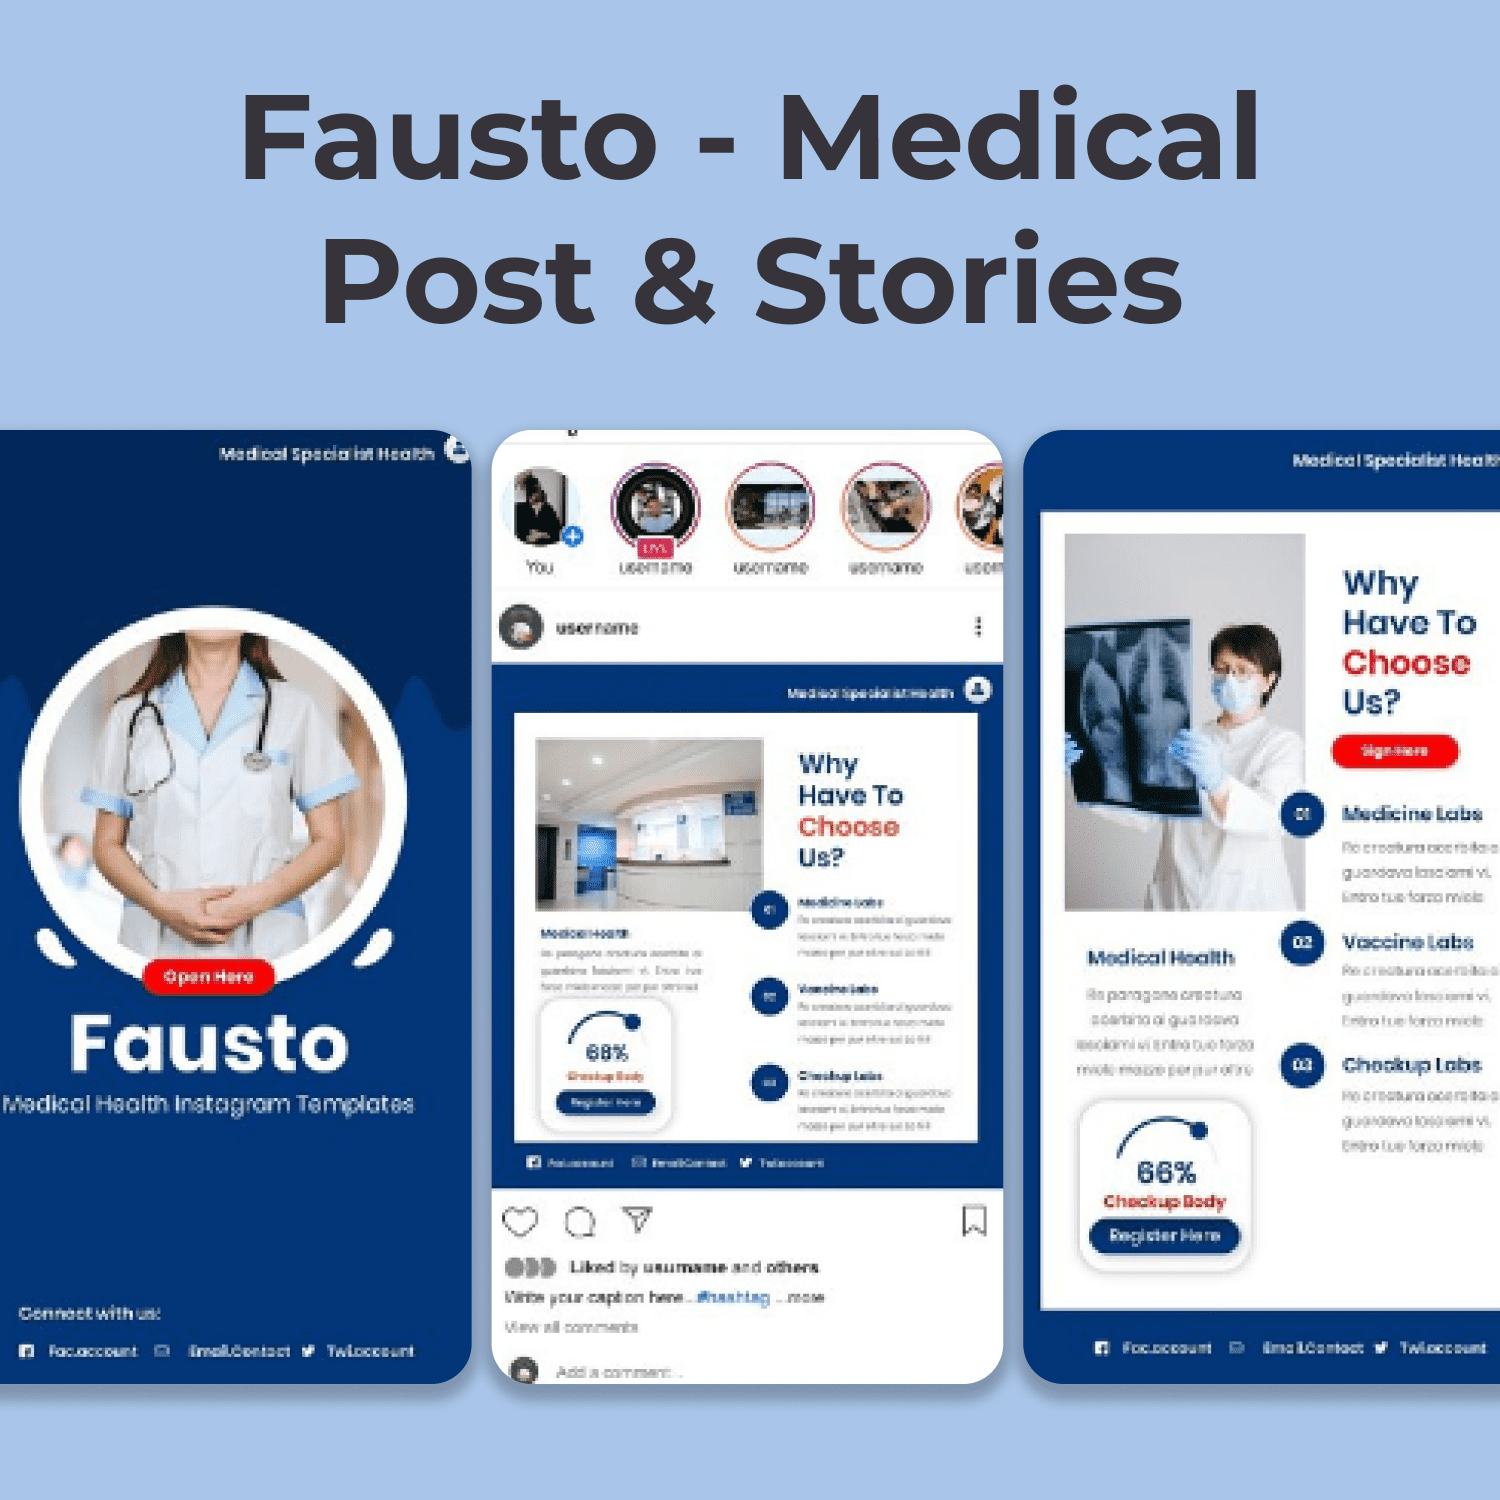 Fausto - Medical Post & Stories cover image.